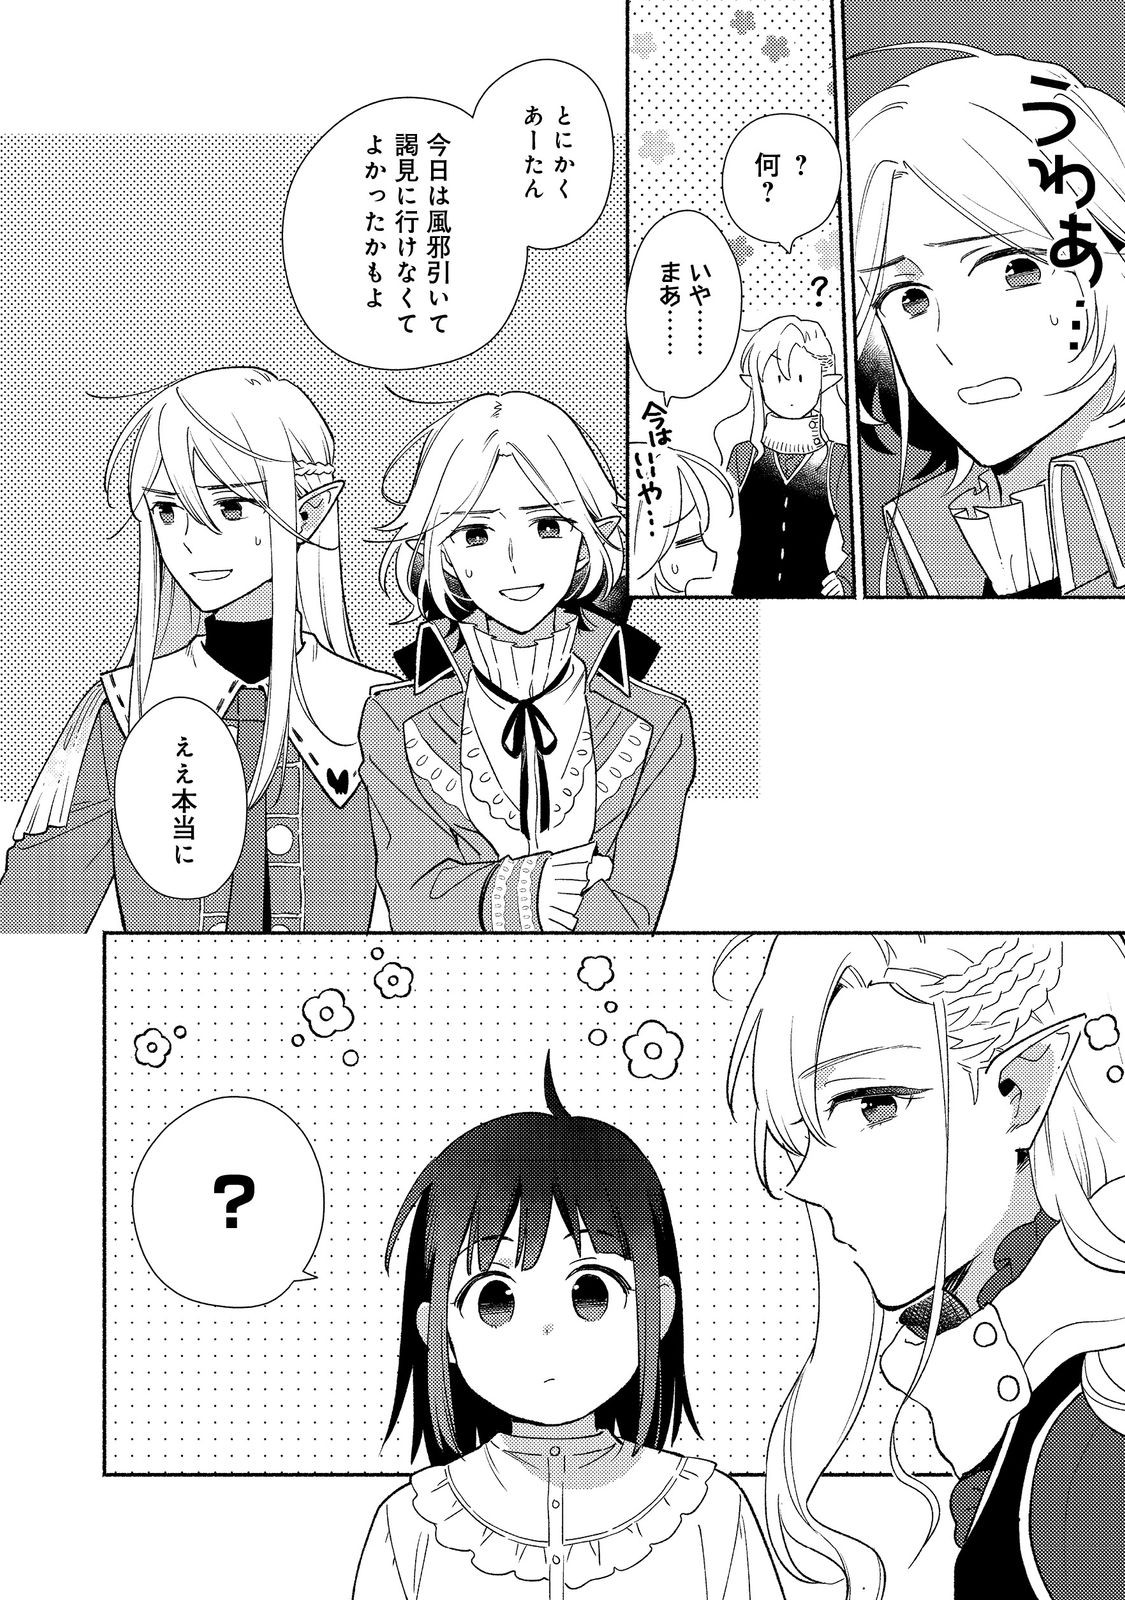 I’m the White Pig Nobleman 第22.2話 - Page 14